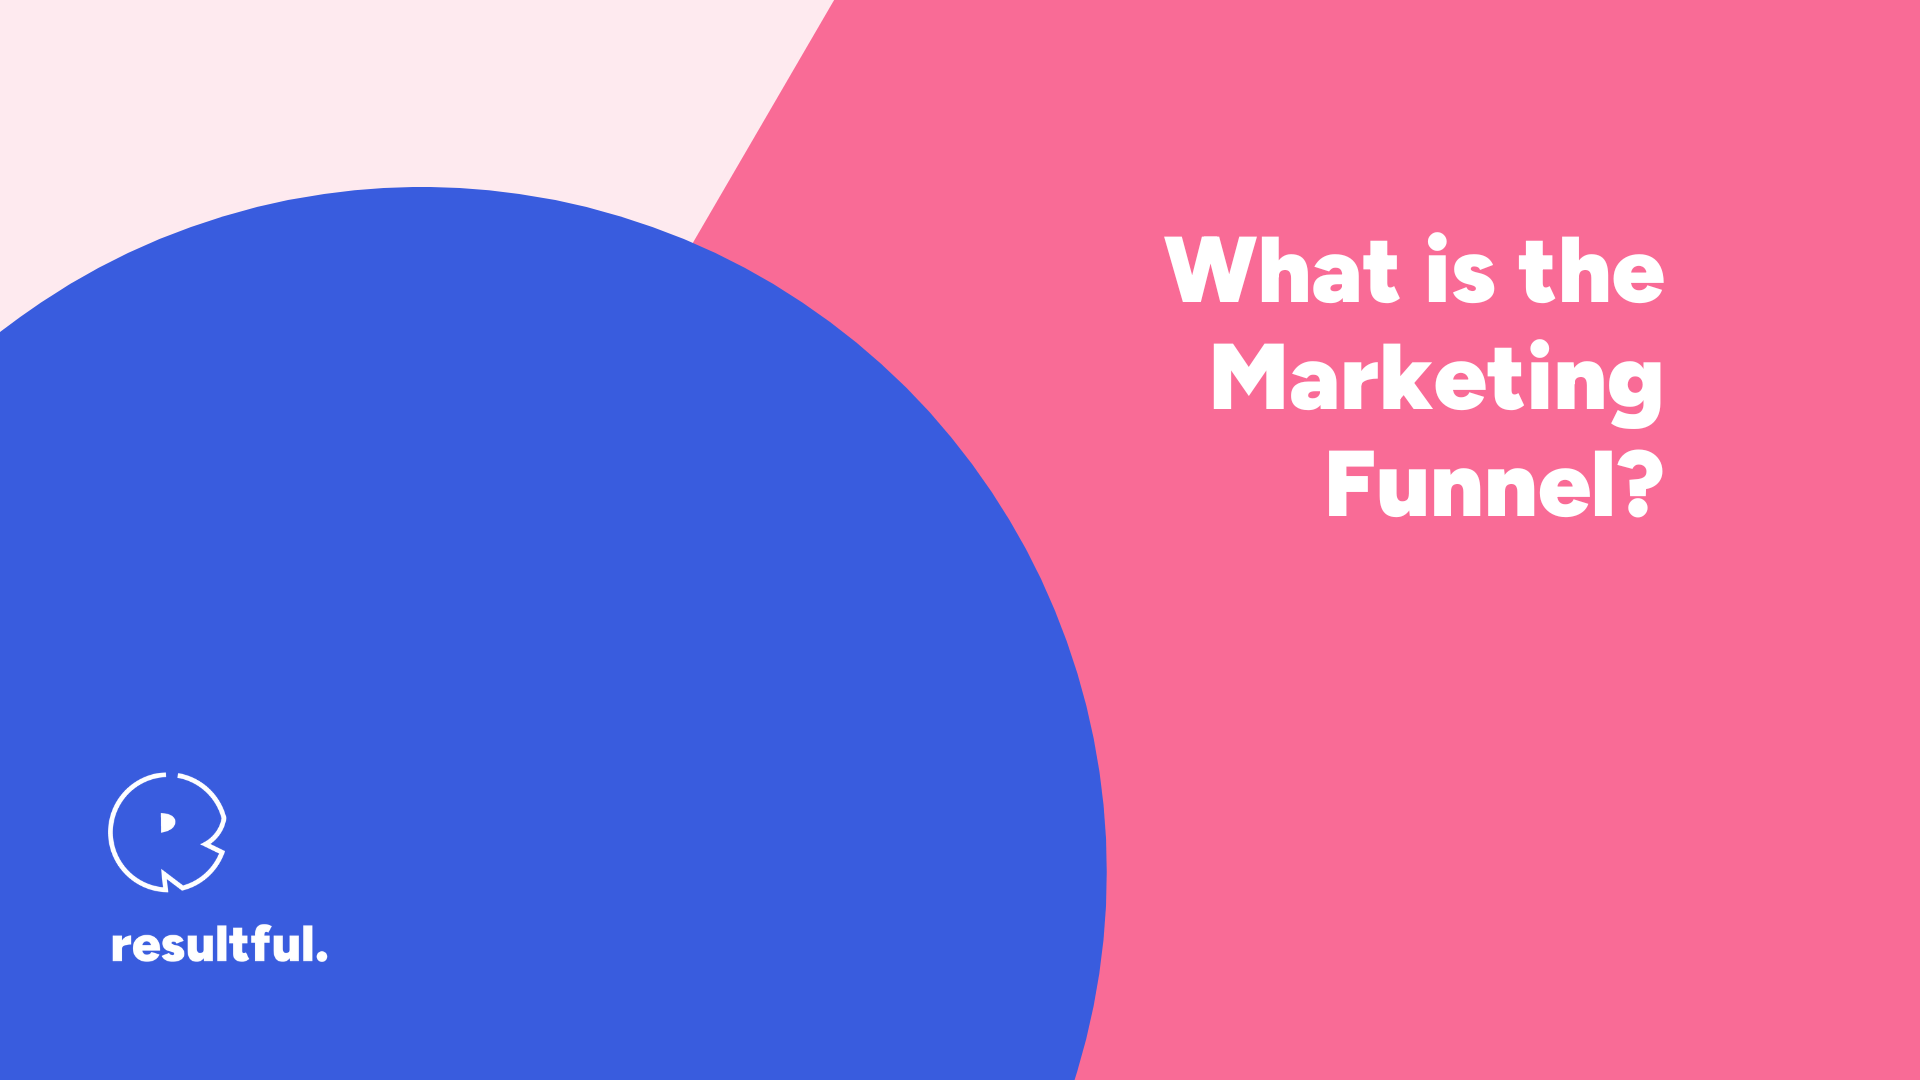 What is the marketing funnel?